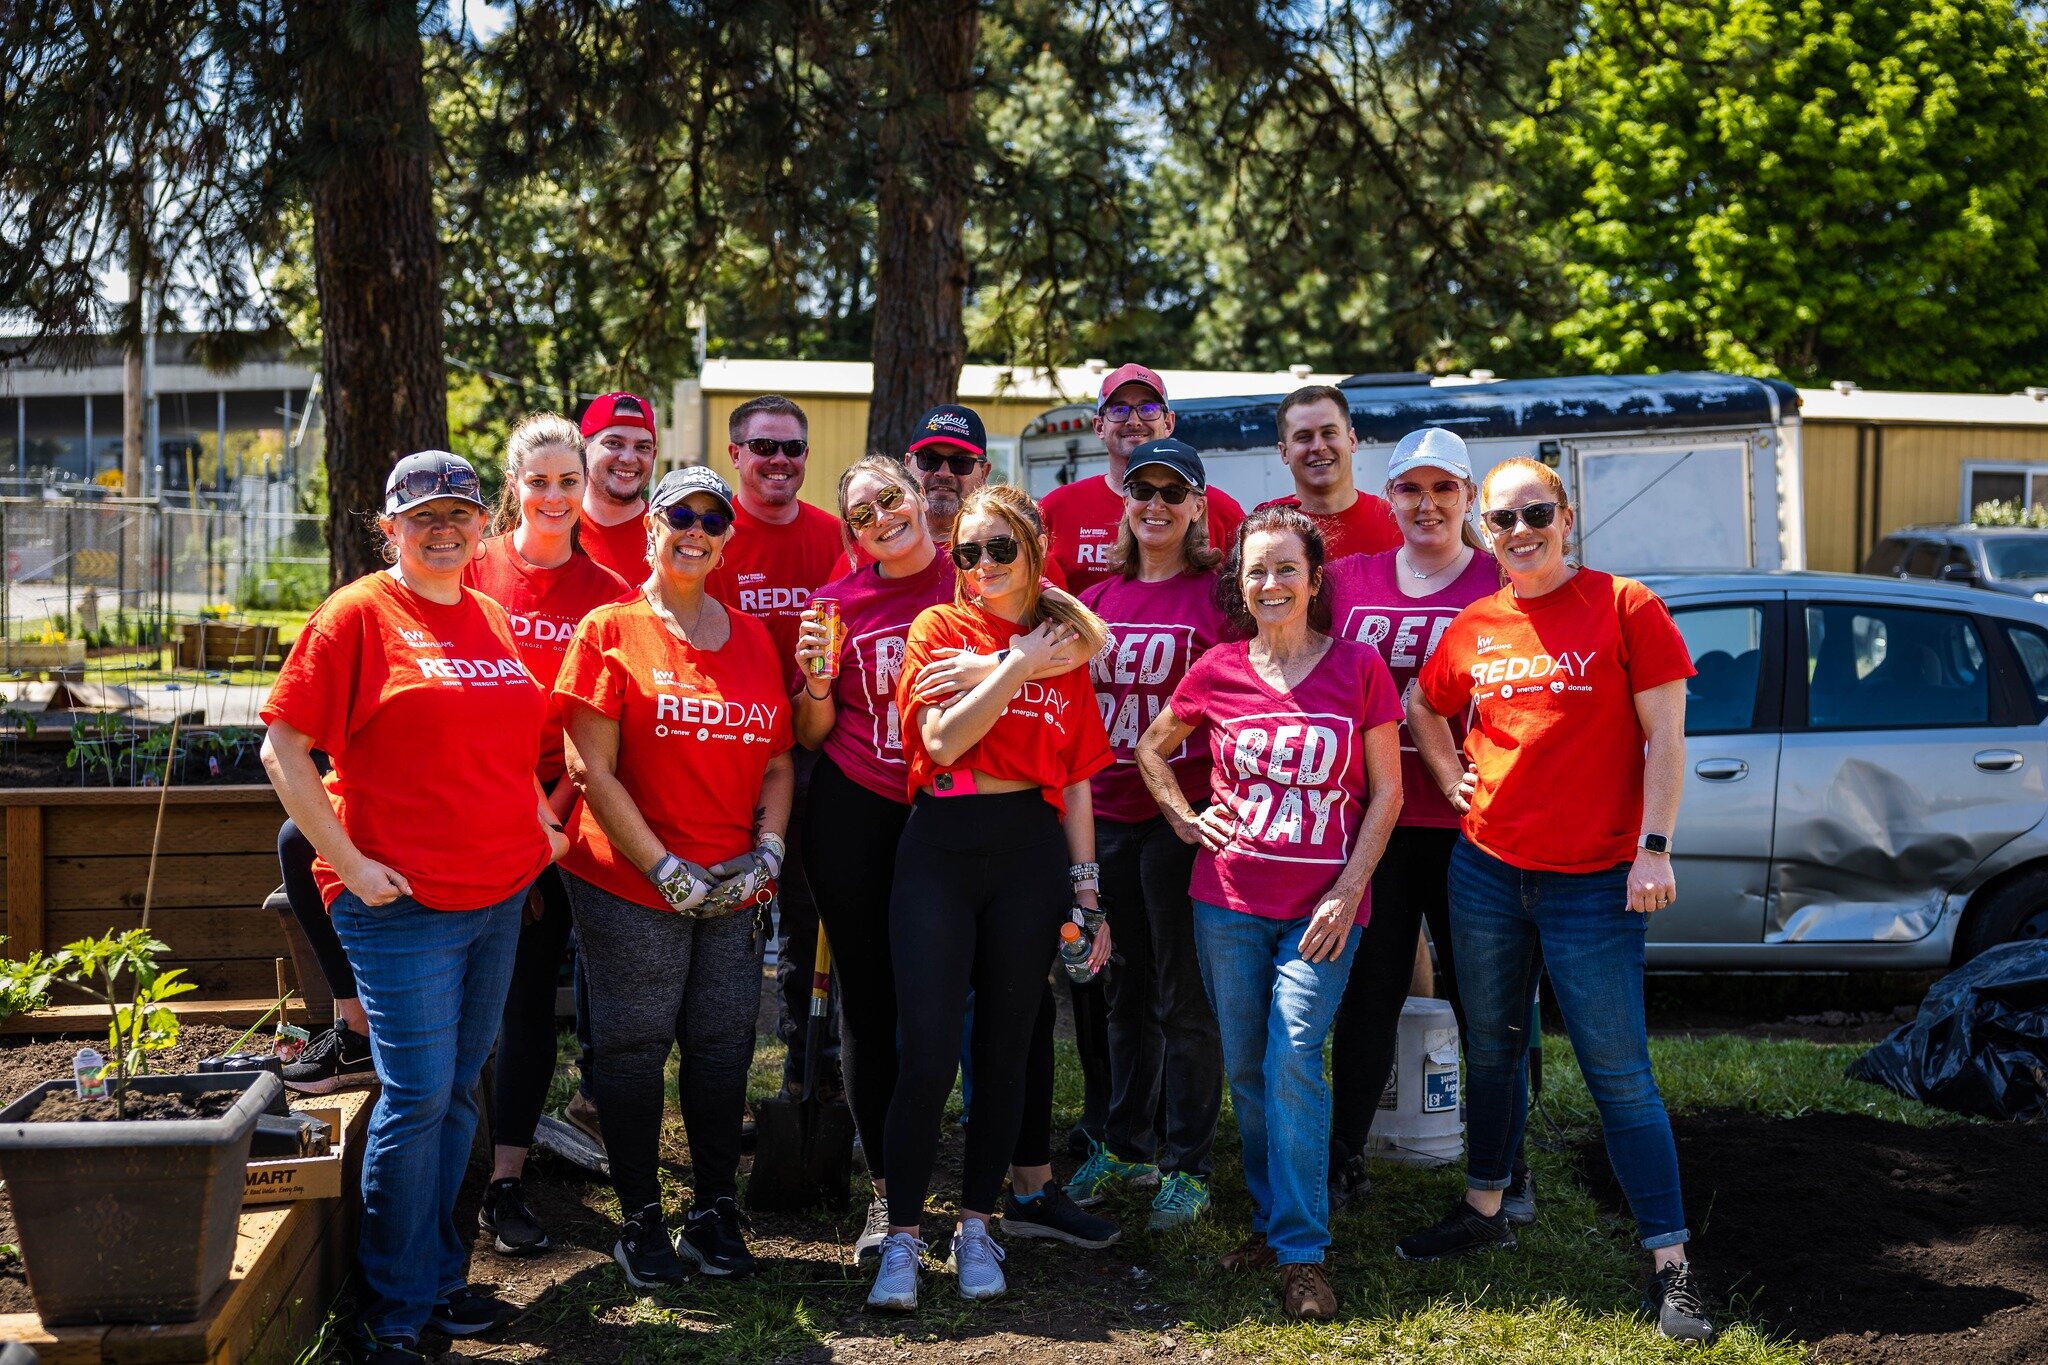 Yesterday, a team from Keller Willaims came to the Mission for their annual volunteering event called &quot;Red Day.&quot; From the early morning to the end of the business day between laughs and coffee, everyone pitched in to beautify outdoor spaces